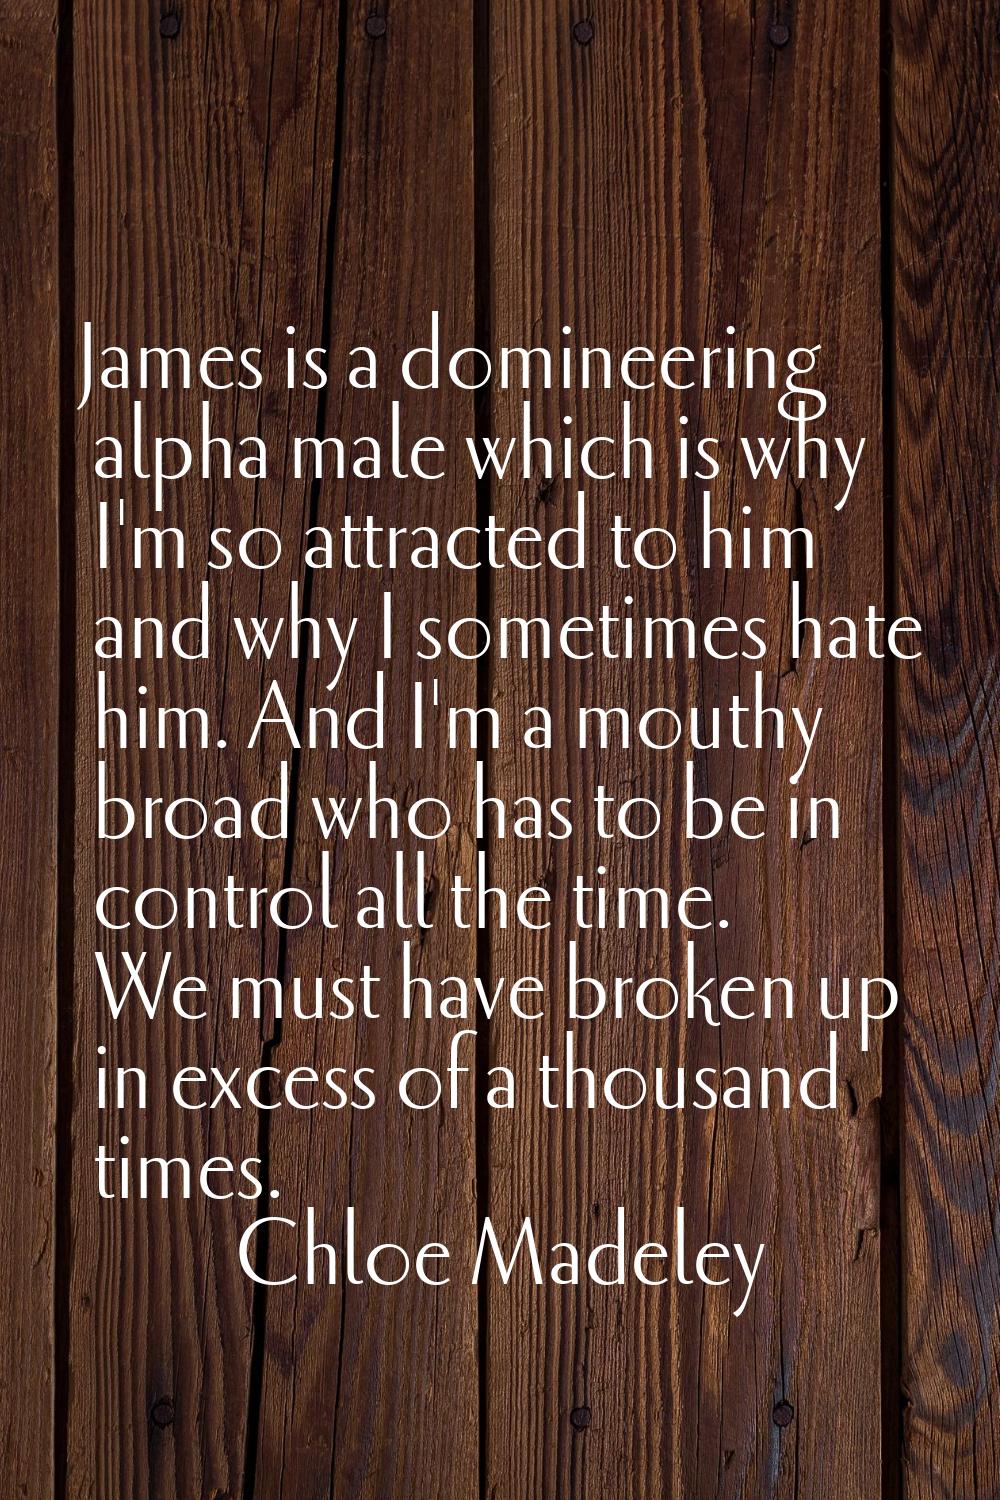 James is a domineering alpha male which is why I'm so attracted to him and why I sometimes hate him